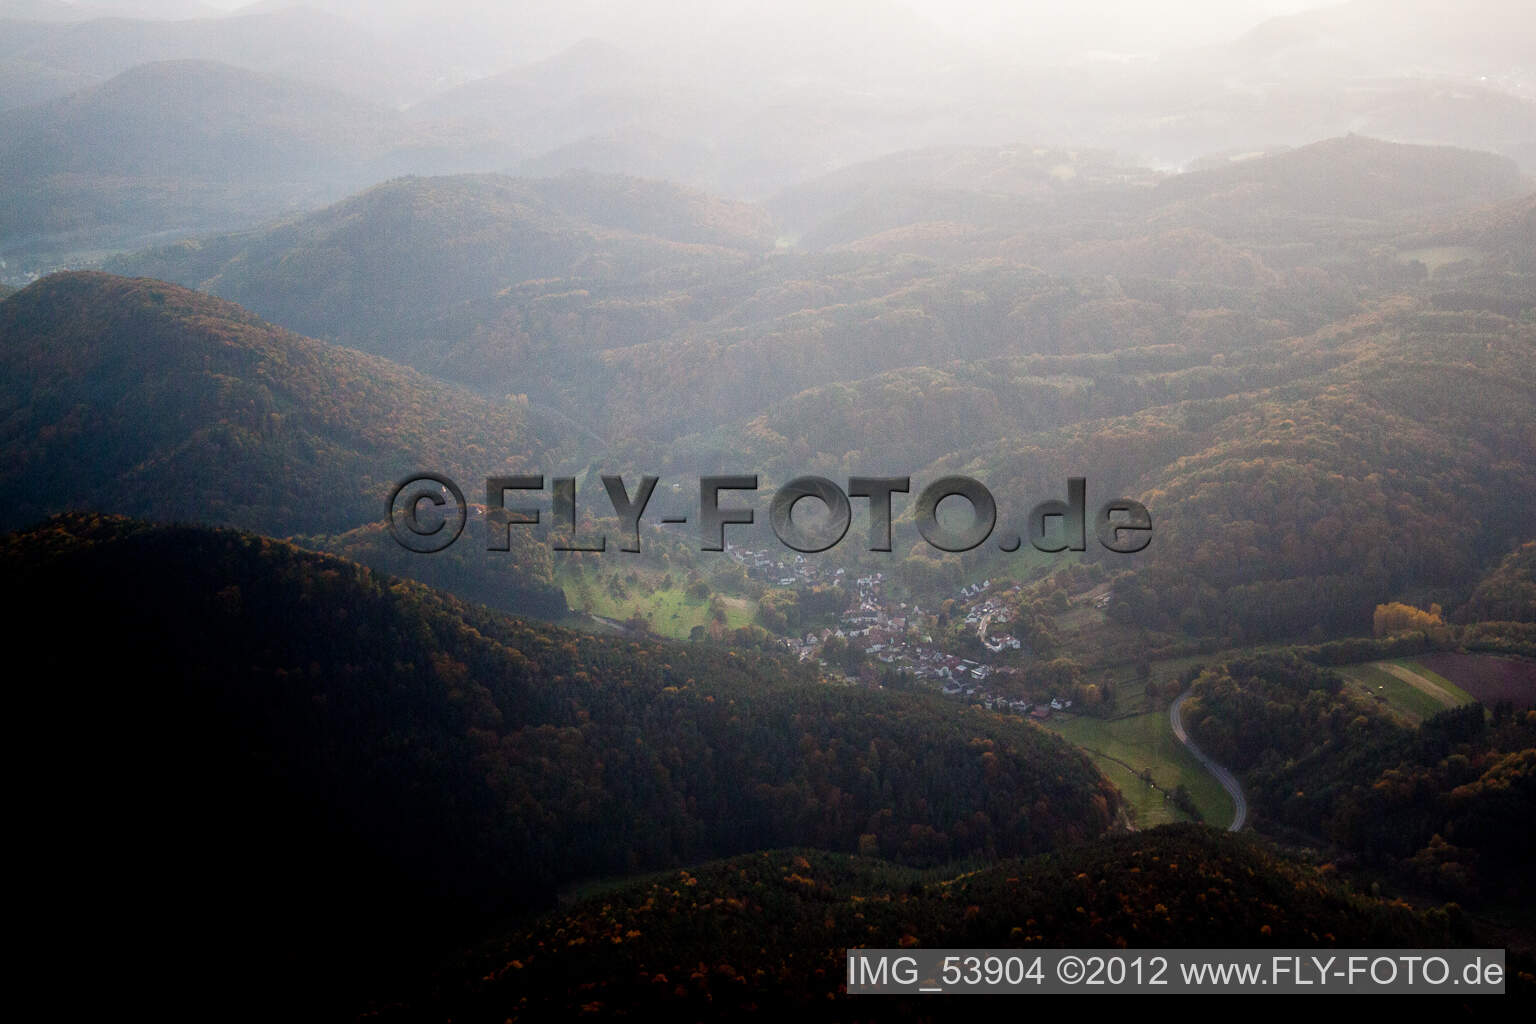 Vorderweidenthal in the state Rhineland-Palatinate, Germany viewn from the air